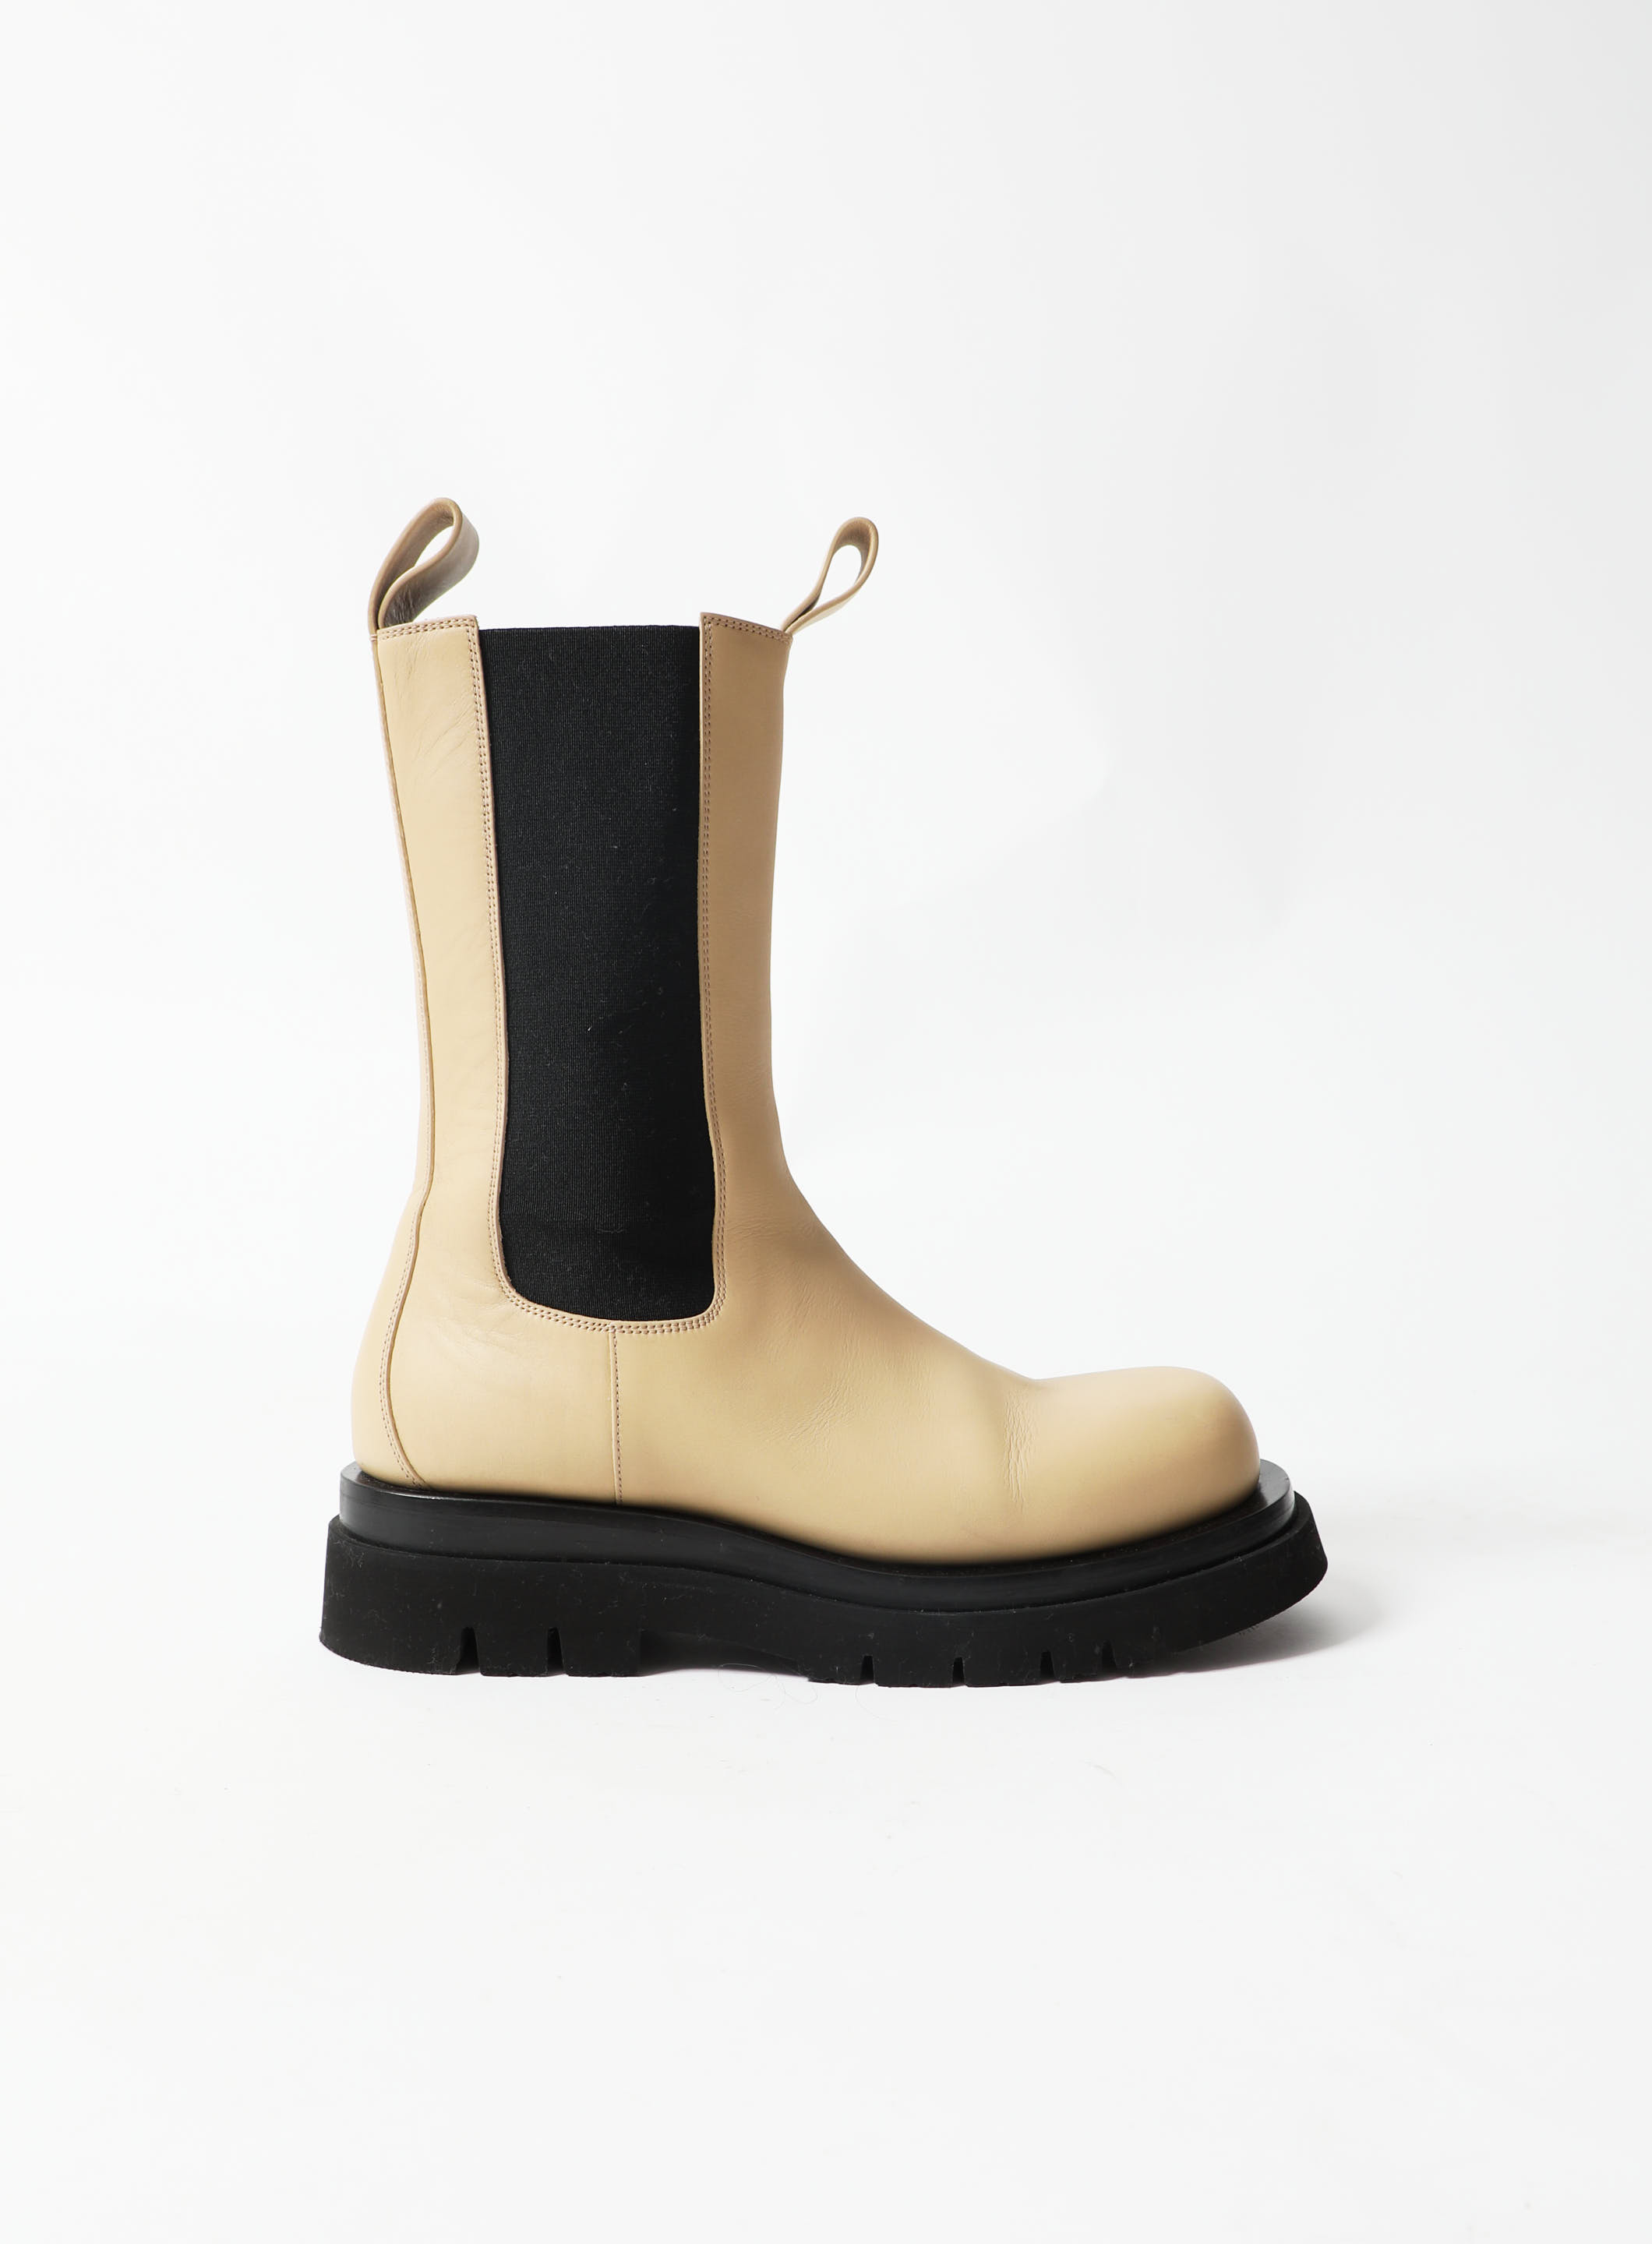 Pre-Fall 2020 BV Tire Chelsea Two-Tone Boots